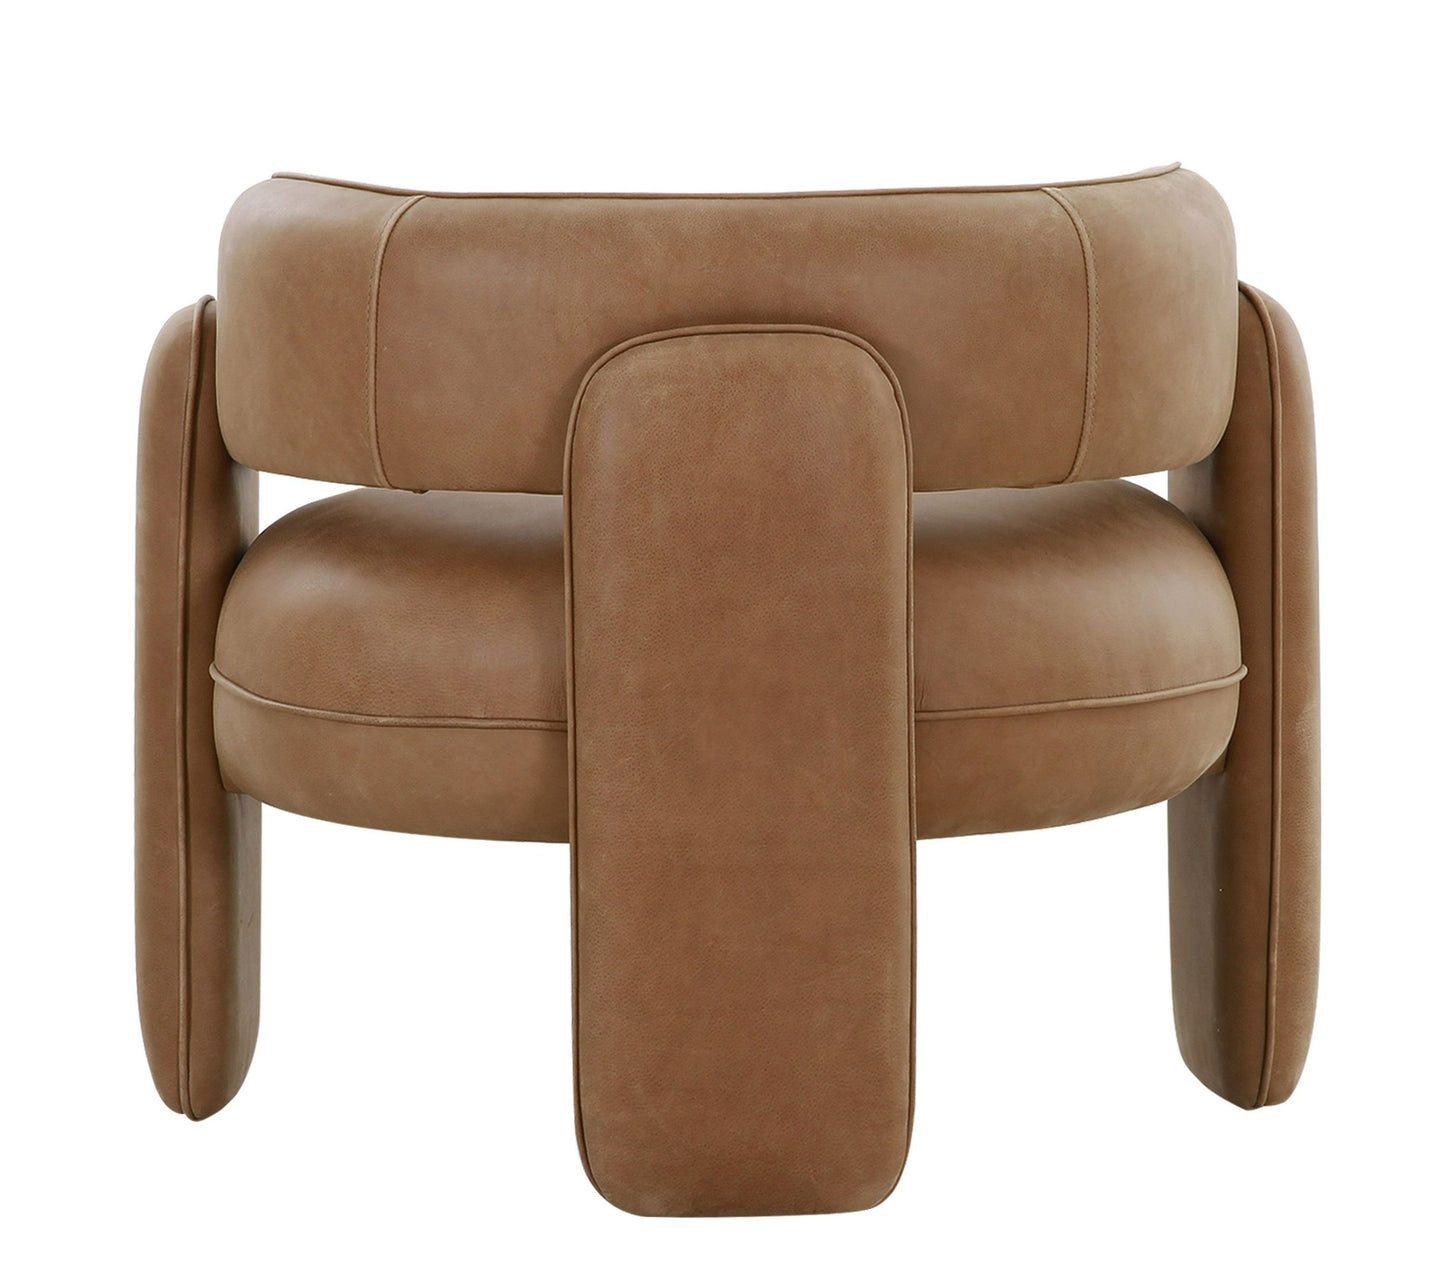 Modrest Tioga - Modern Brown Leather Accent Chair